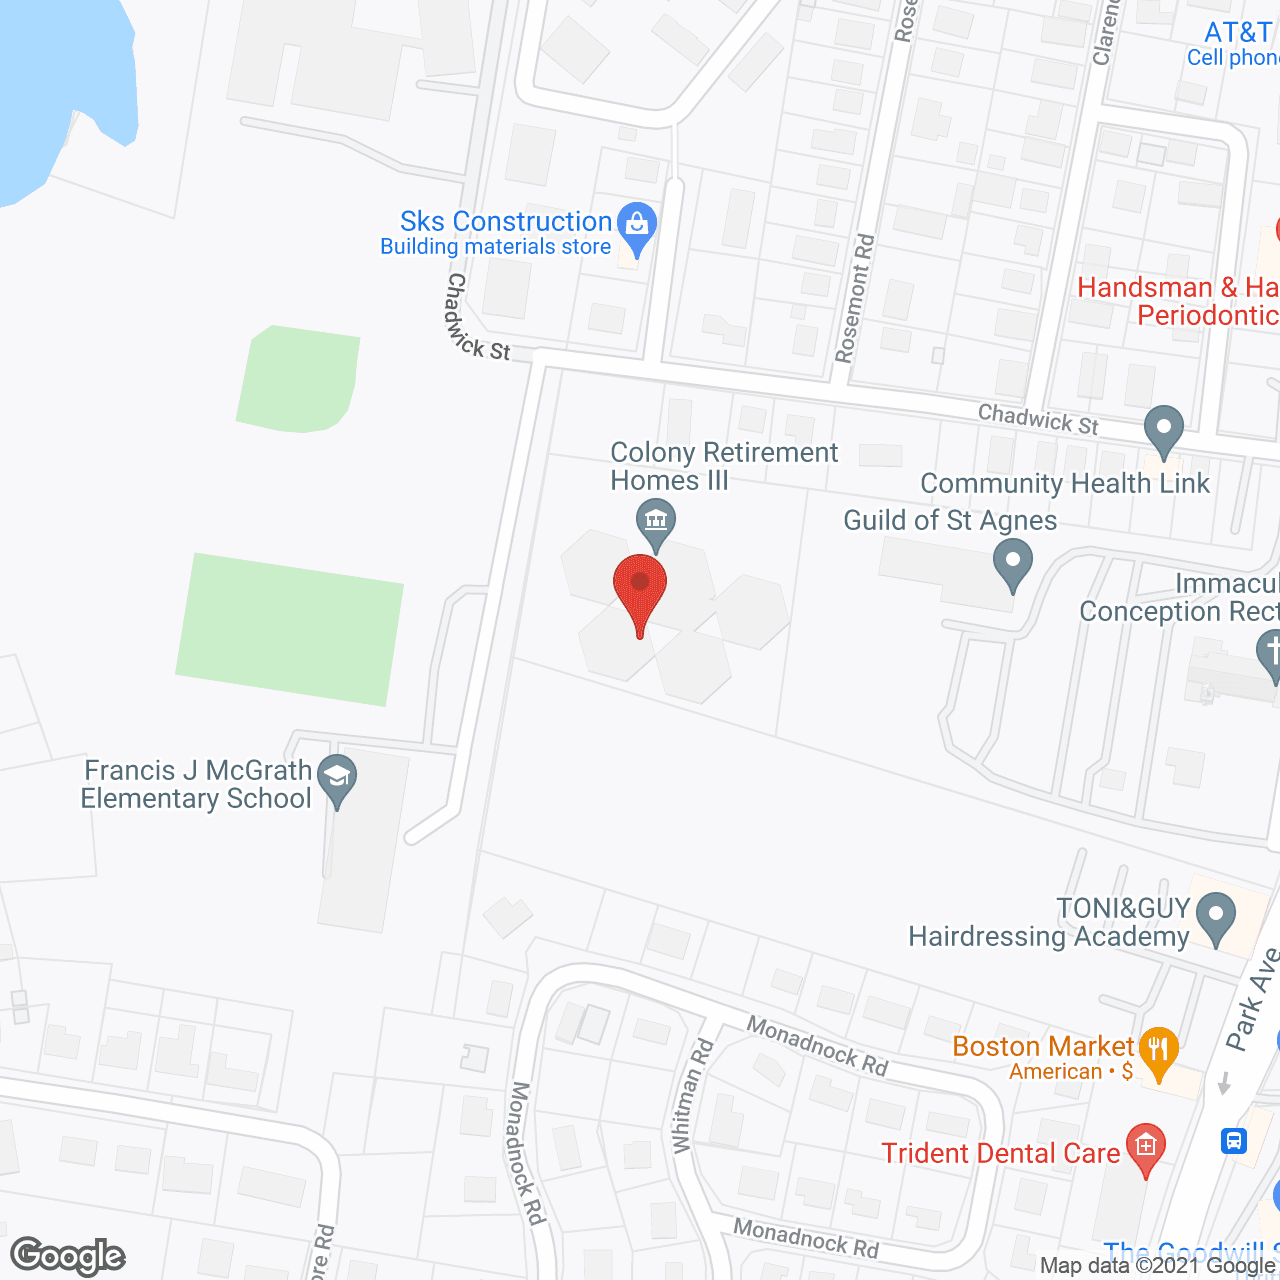 Colony Retirement Homes III in google map